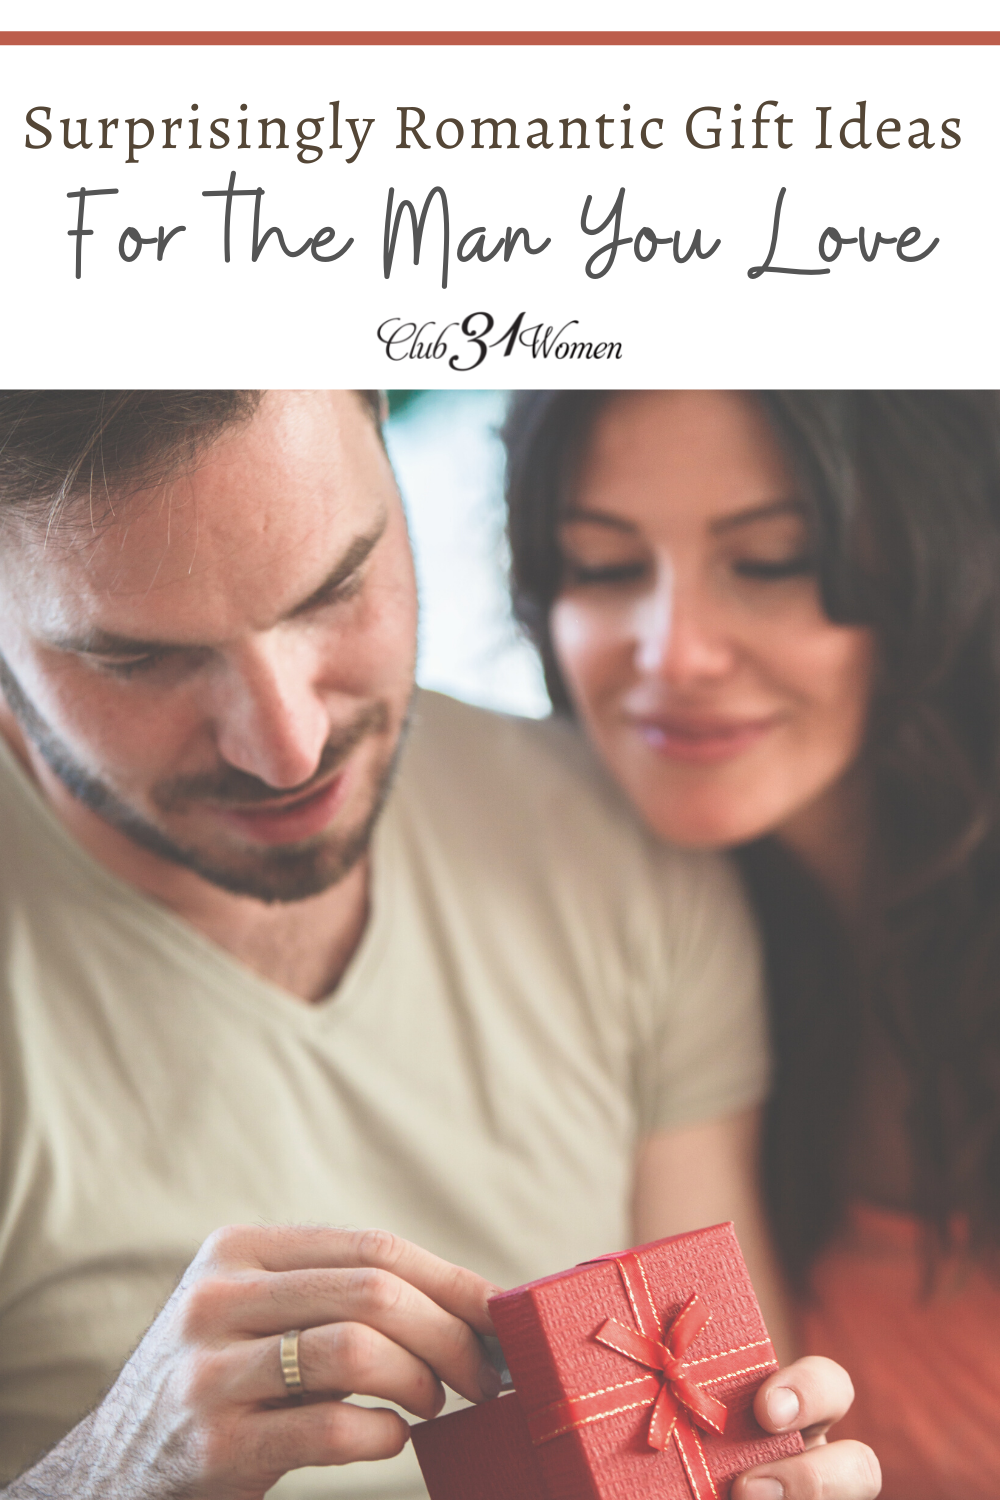 Looking for a romantic gift for the man you love? Something special that he will really enjoy and appreciate? Here are 15 affordable gift ideas just for him! via @Club31Women